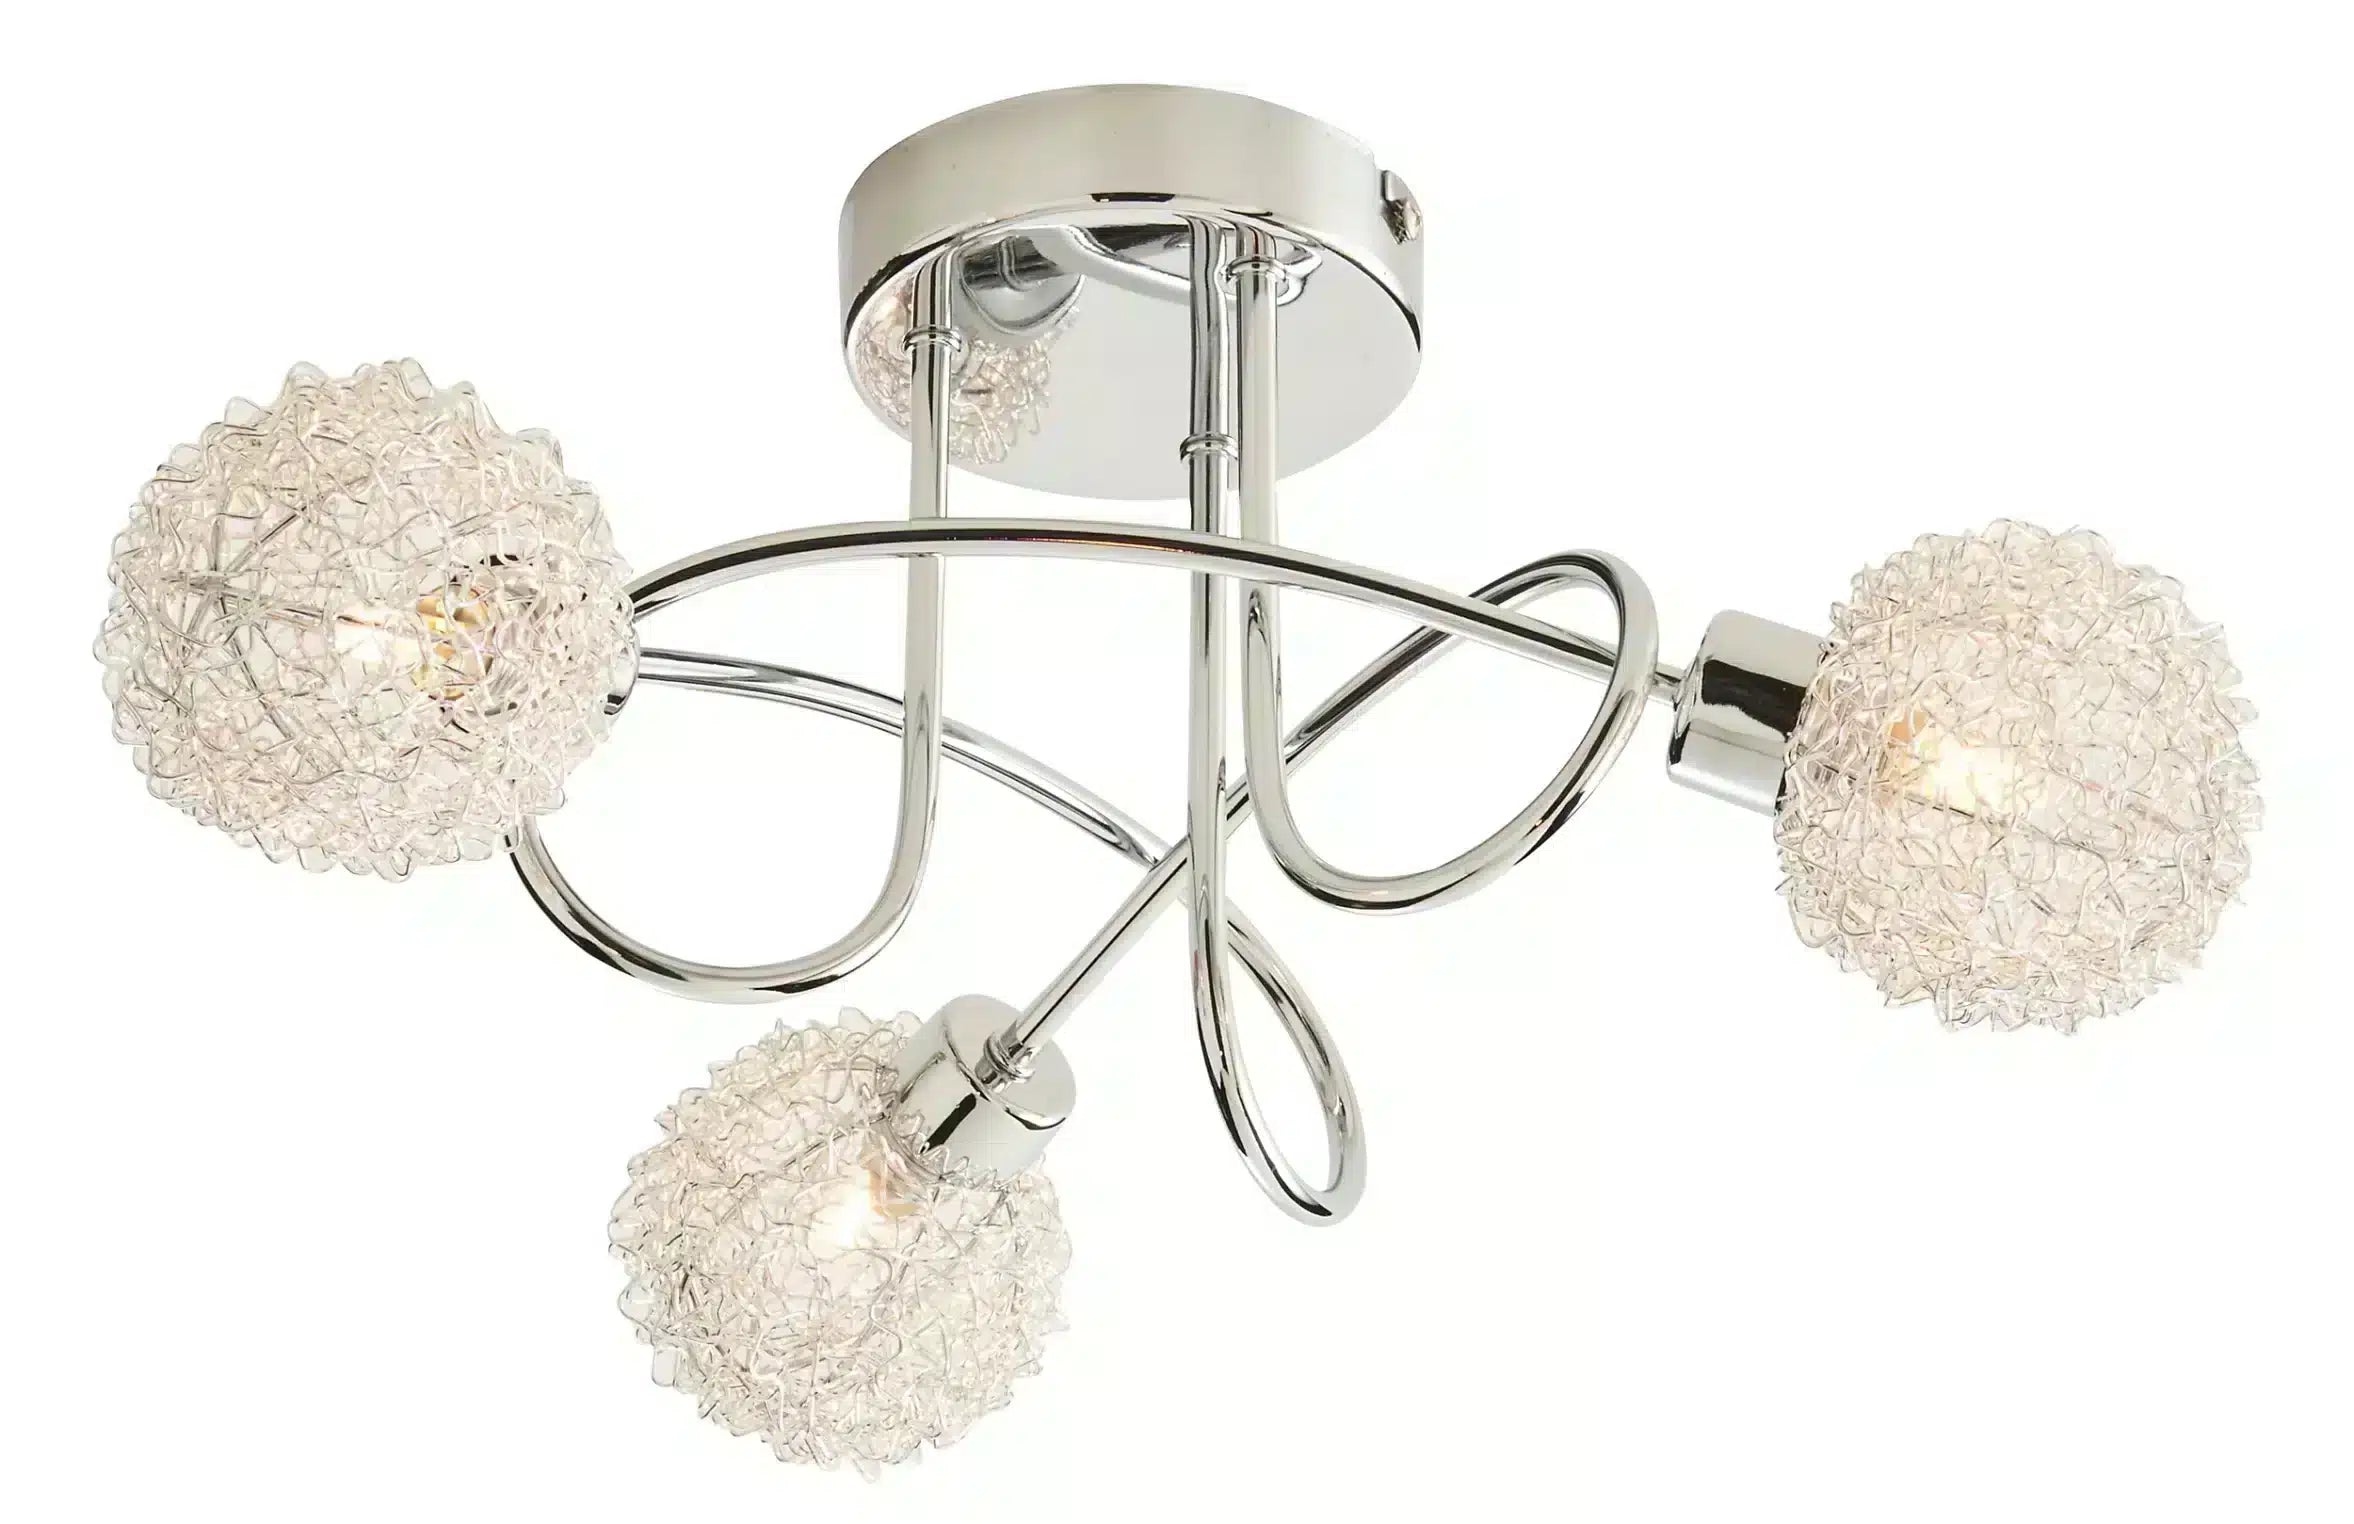 Colours Caelus Brushed Metal Chrome effect 3 Lamp Ceiling light-2044